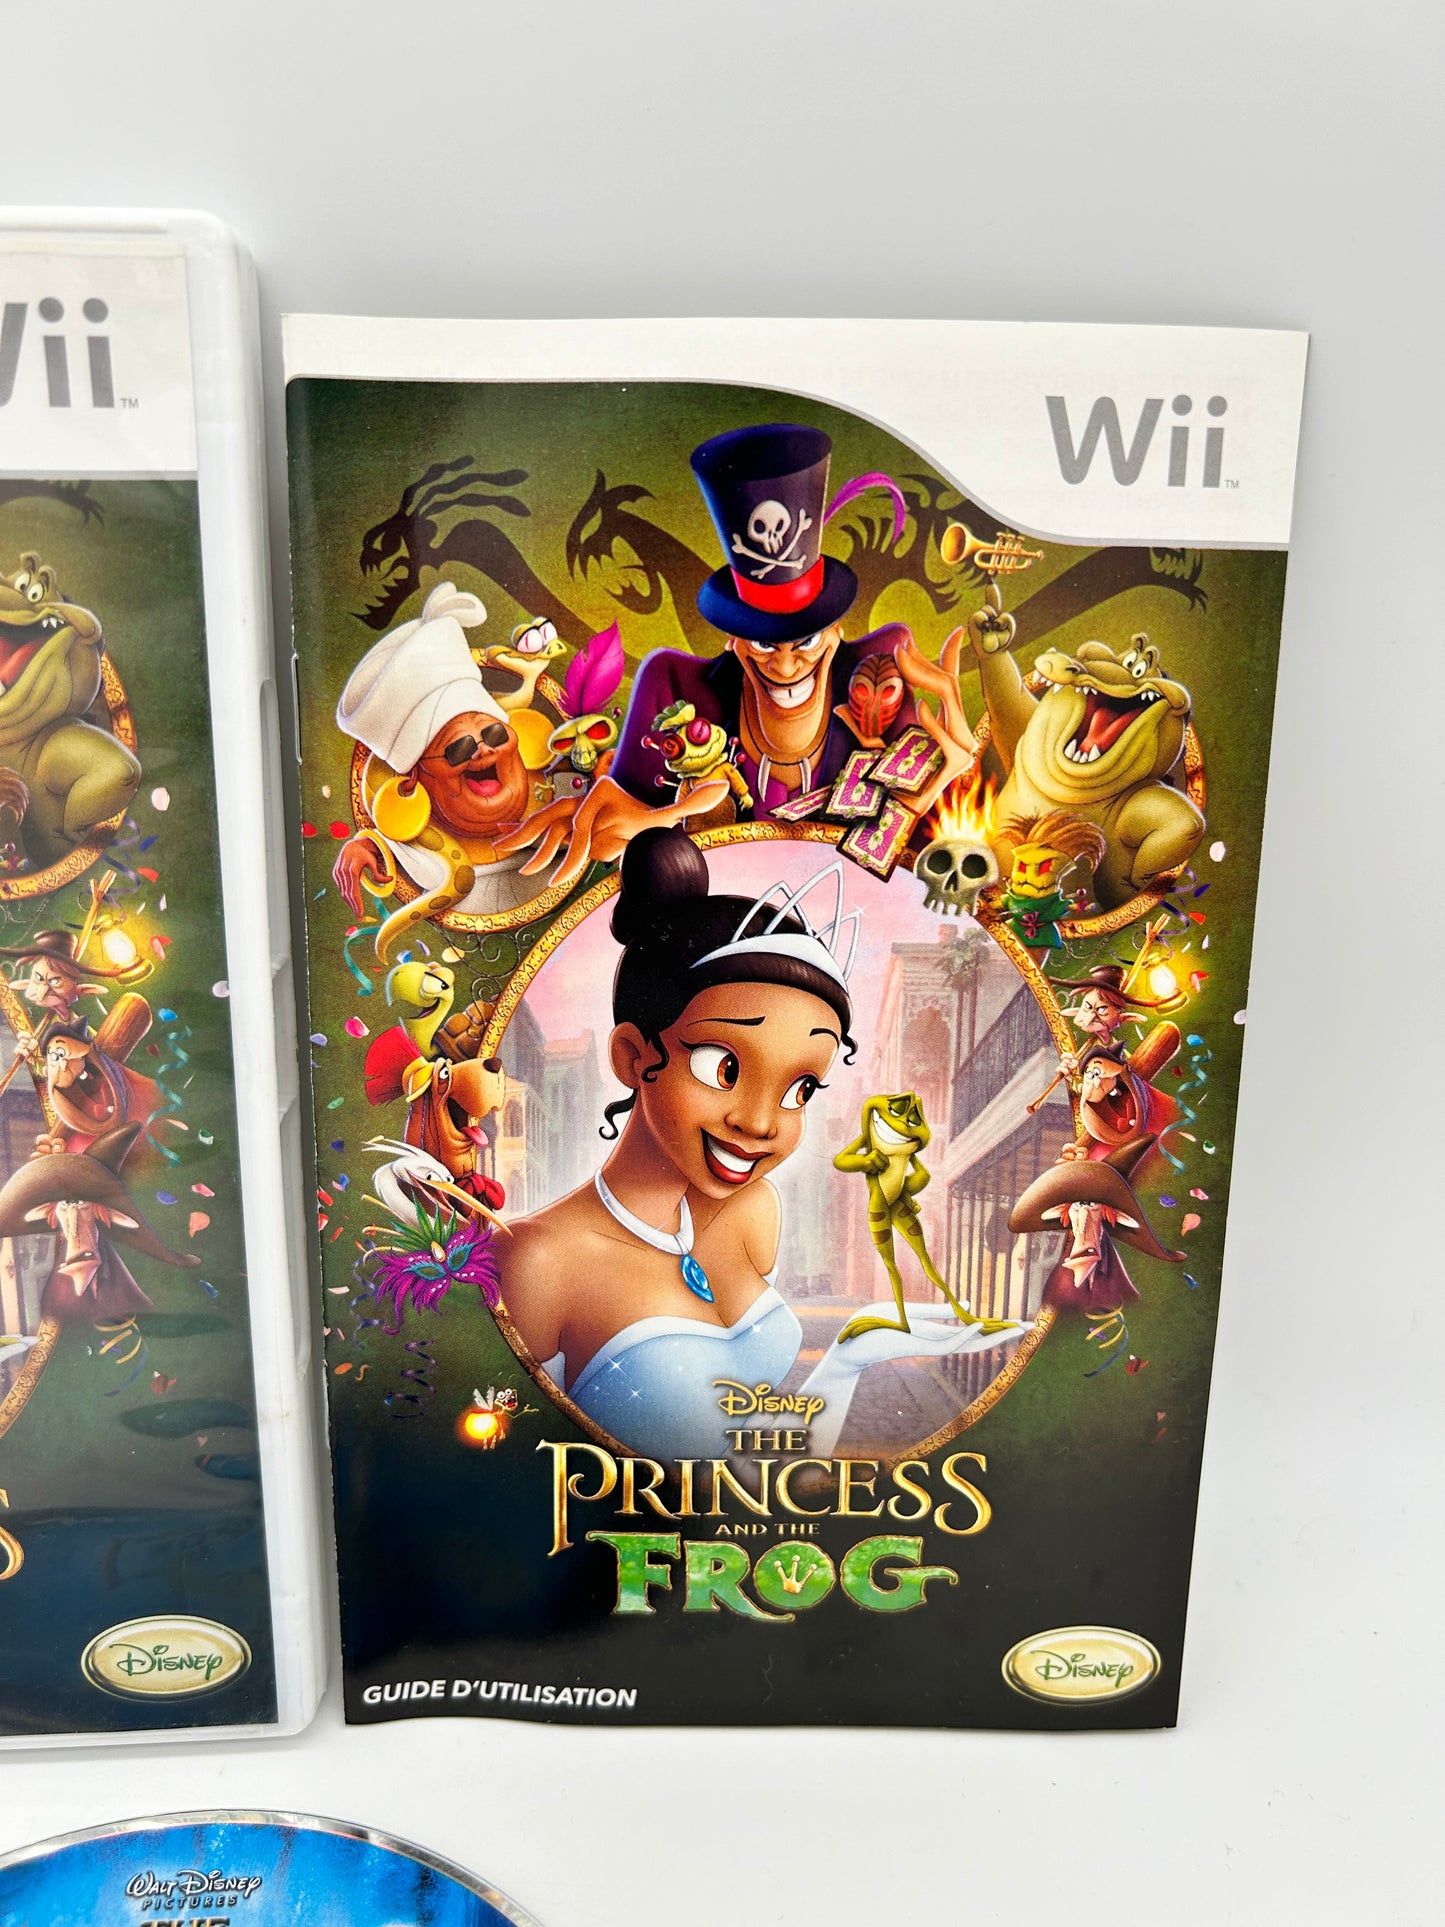 NiNTENDO Wii | THE PRiNCESS AND THE FROG